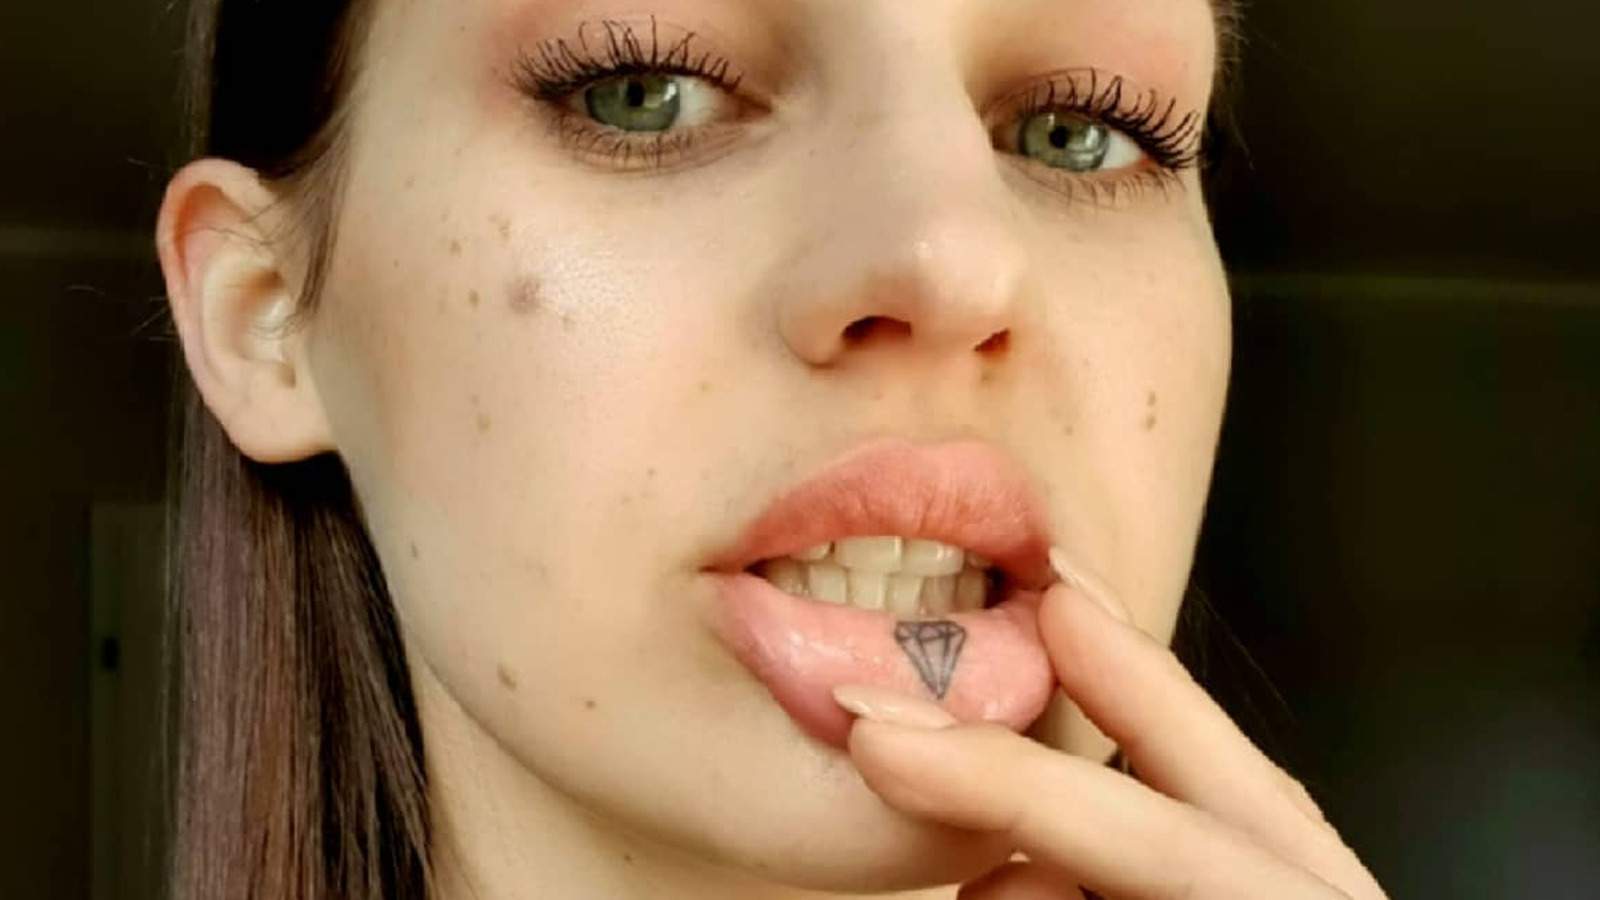 The Inability To Clean Inner Lip Tattoos Can Lead To A Dangerous Situation